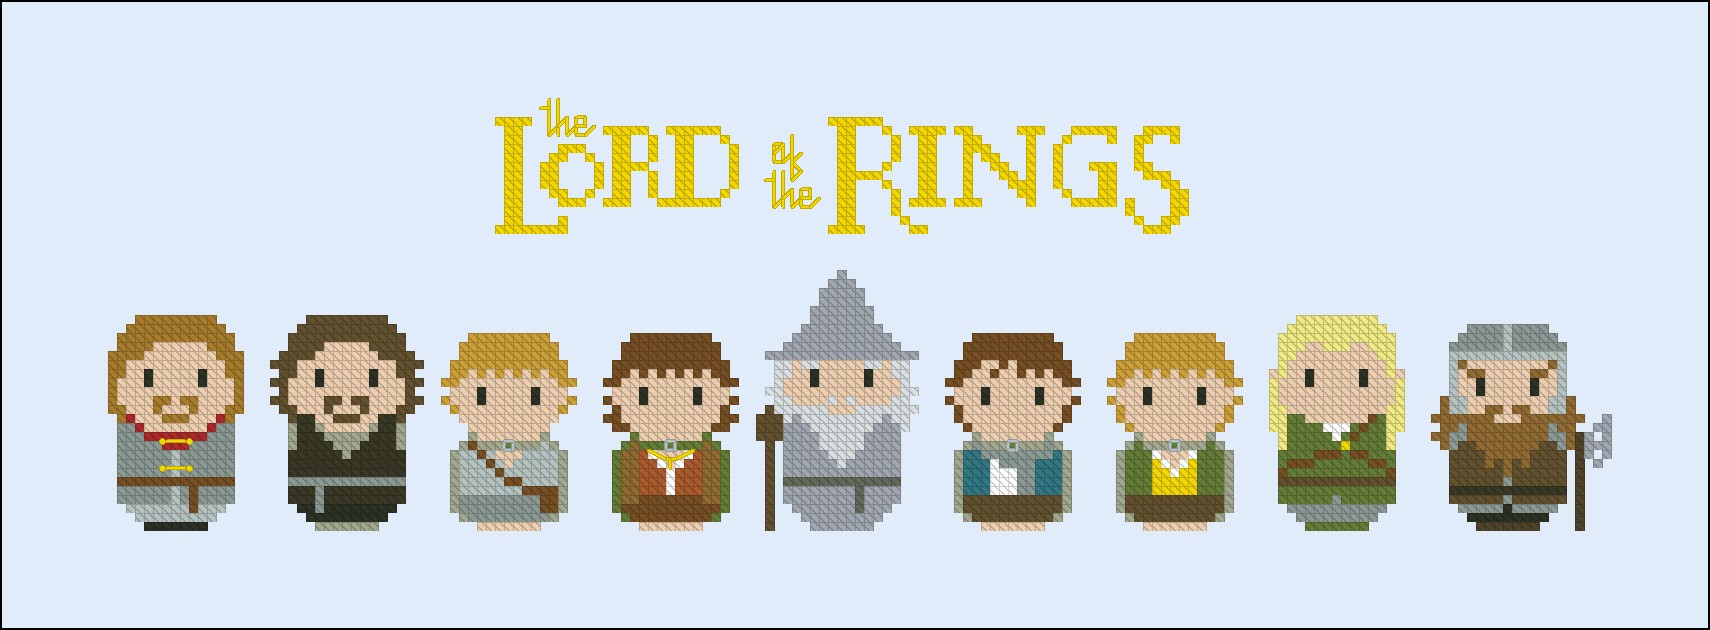 the lord of the rings ring in perler beads